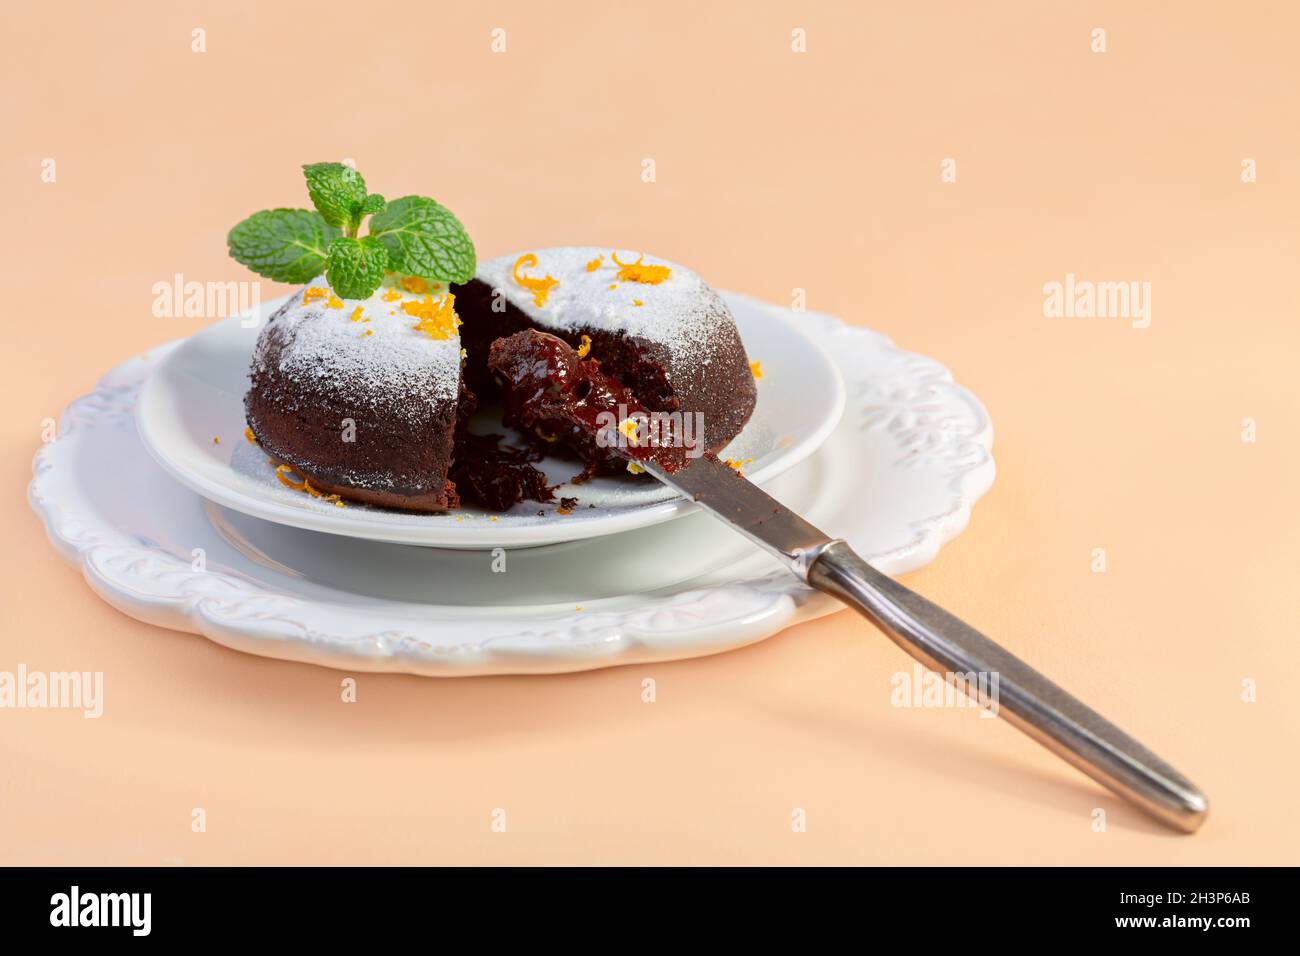 Chocolate cake with a melted core. Stock Photo